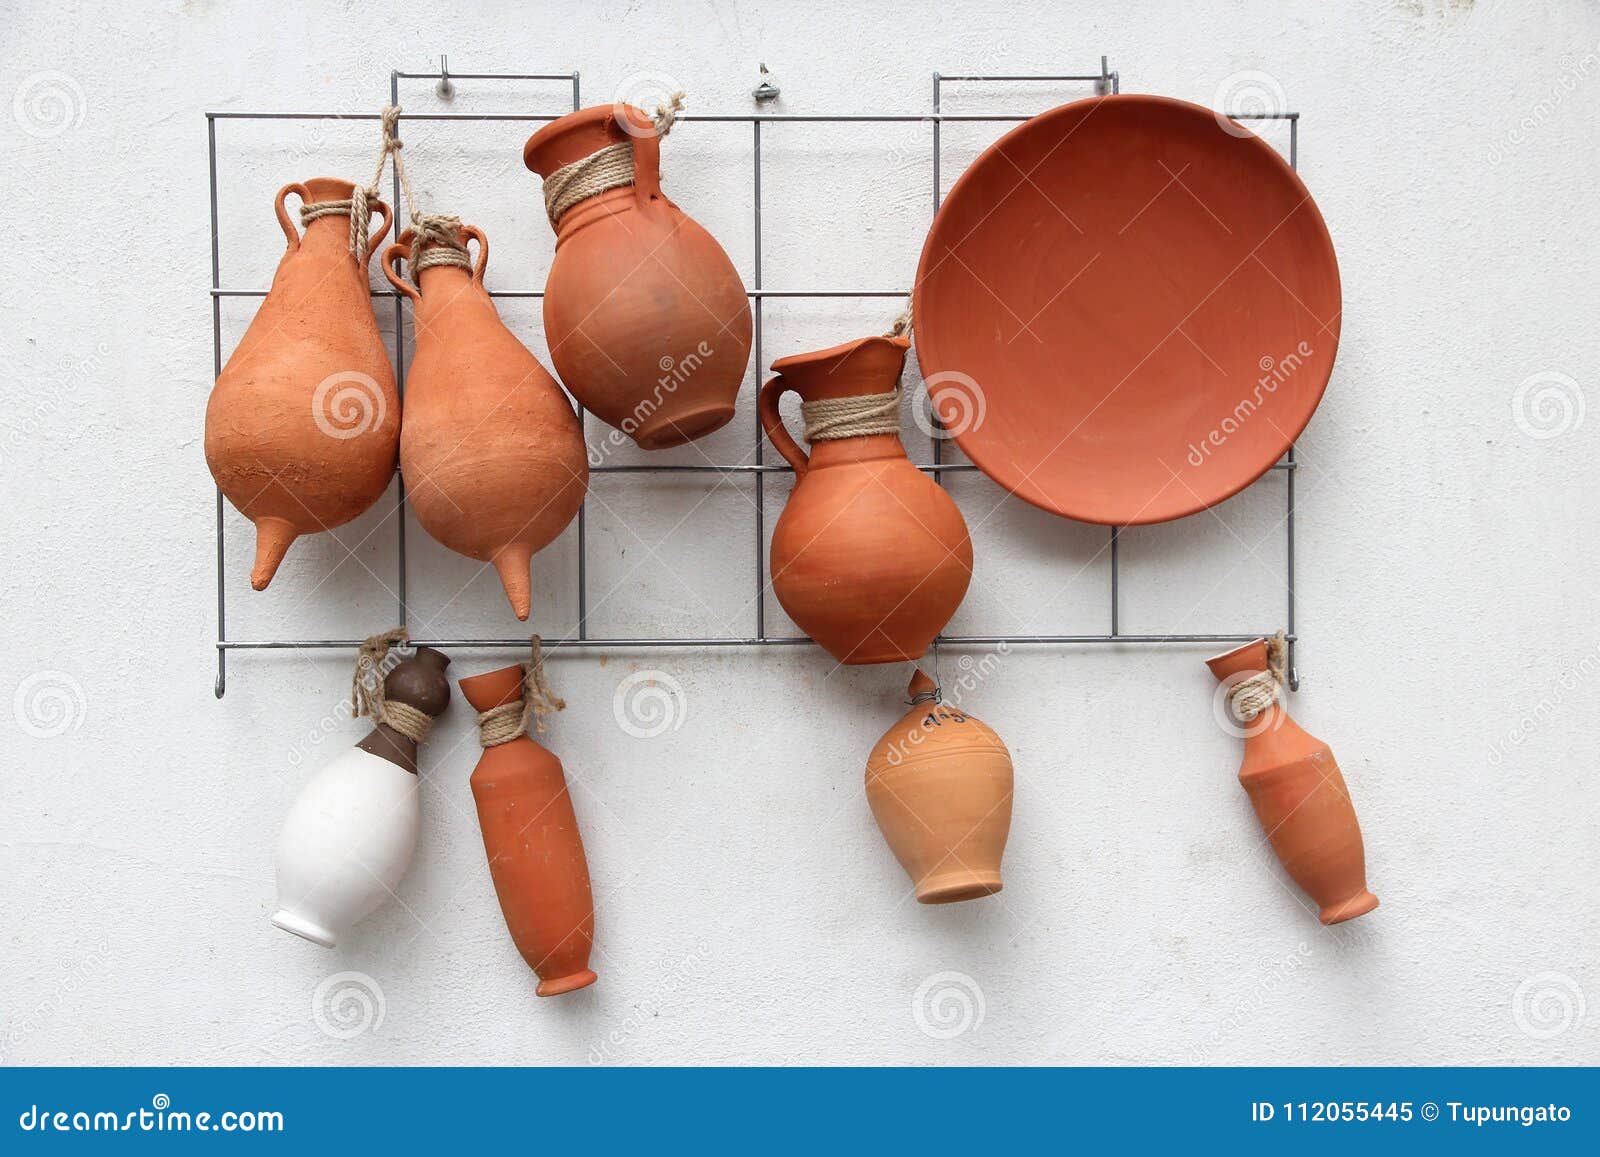 https://thumbs.dreamstime.com/z/spanish-clay-pottery-seville-spain-traditional-handicraft-clay-pottery-ceramic-pots-decoration-112055445.jpg